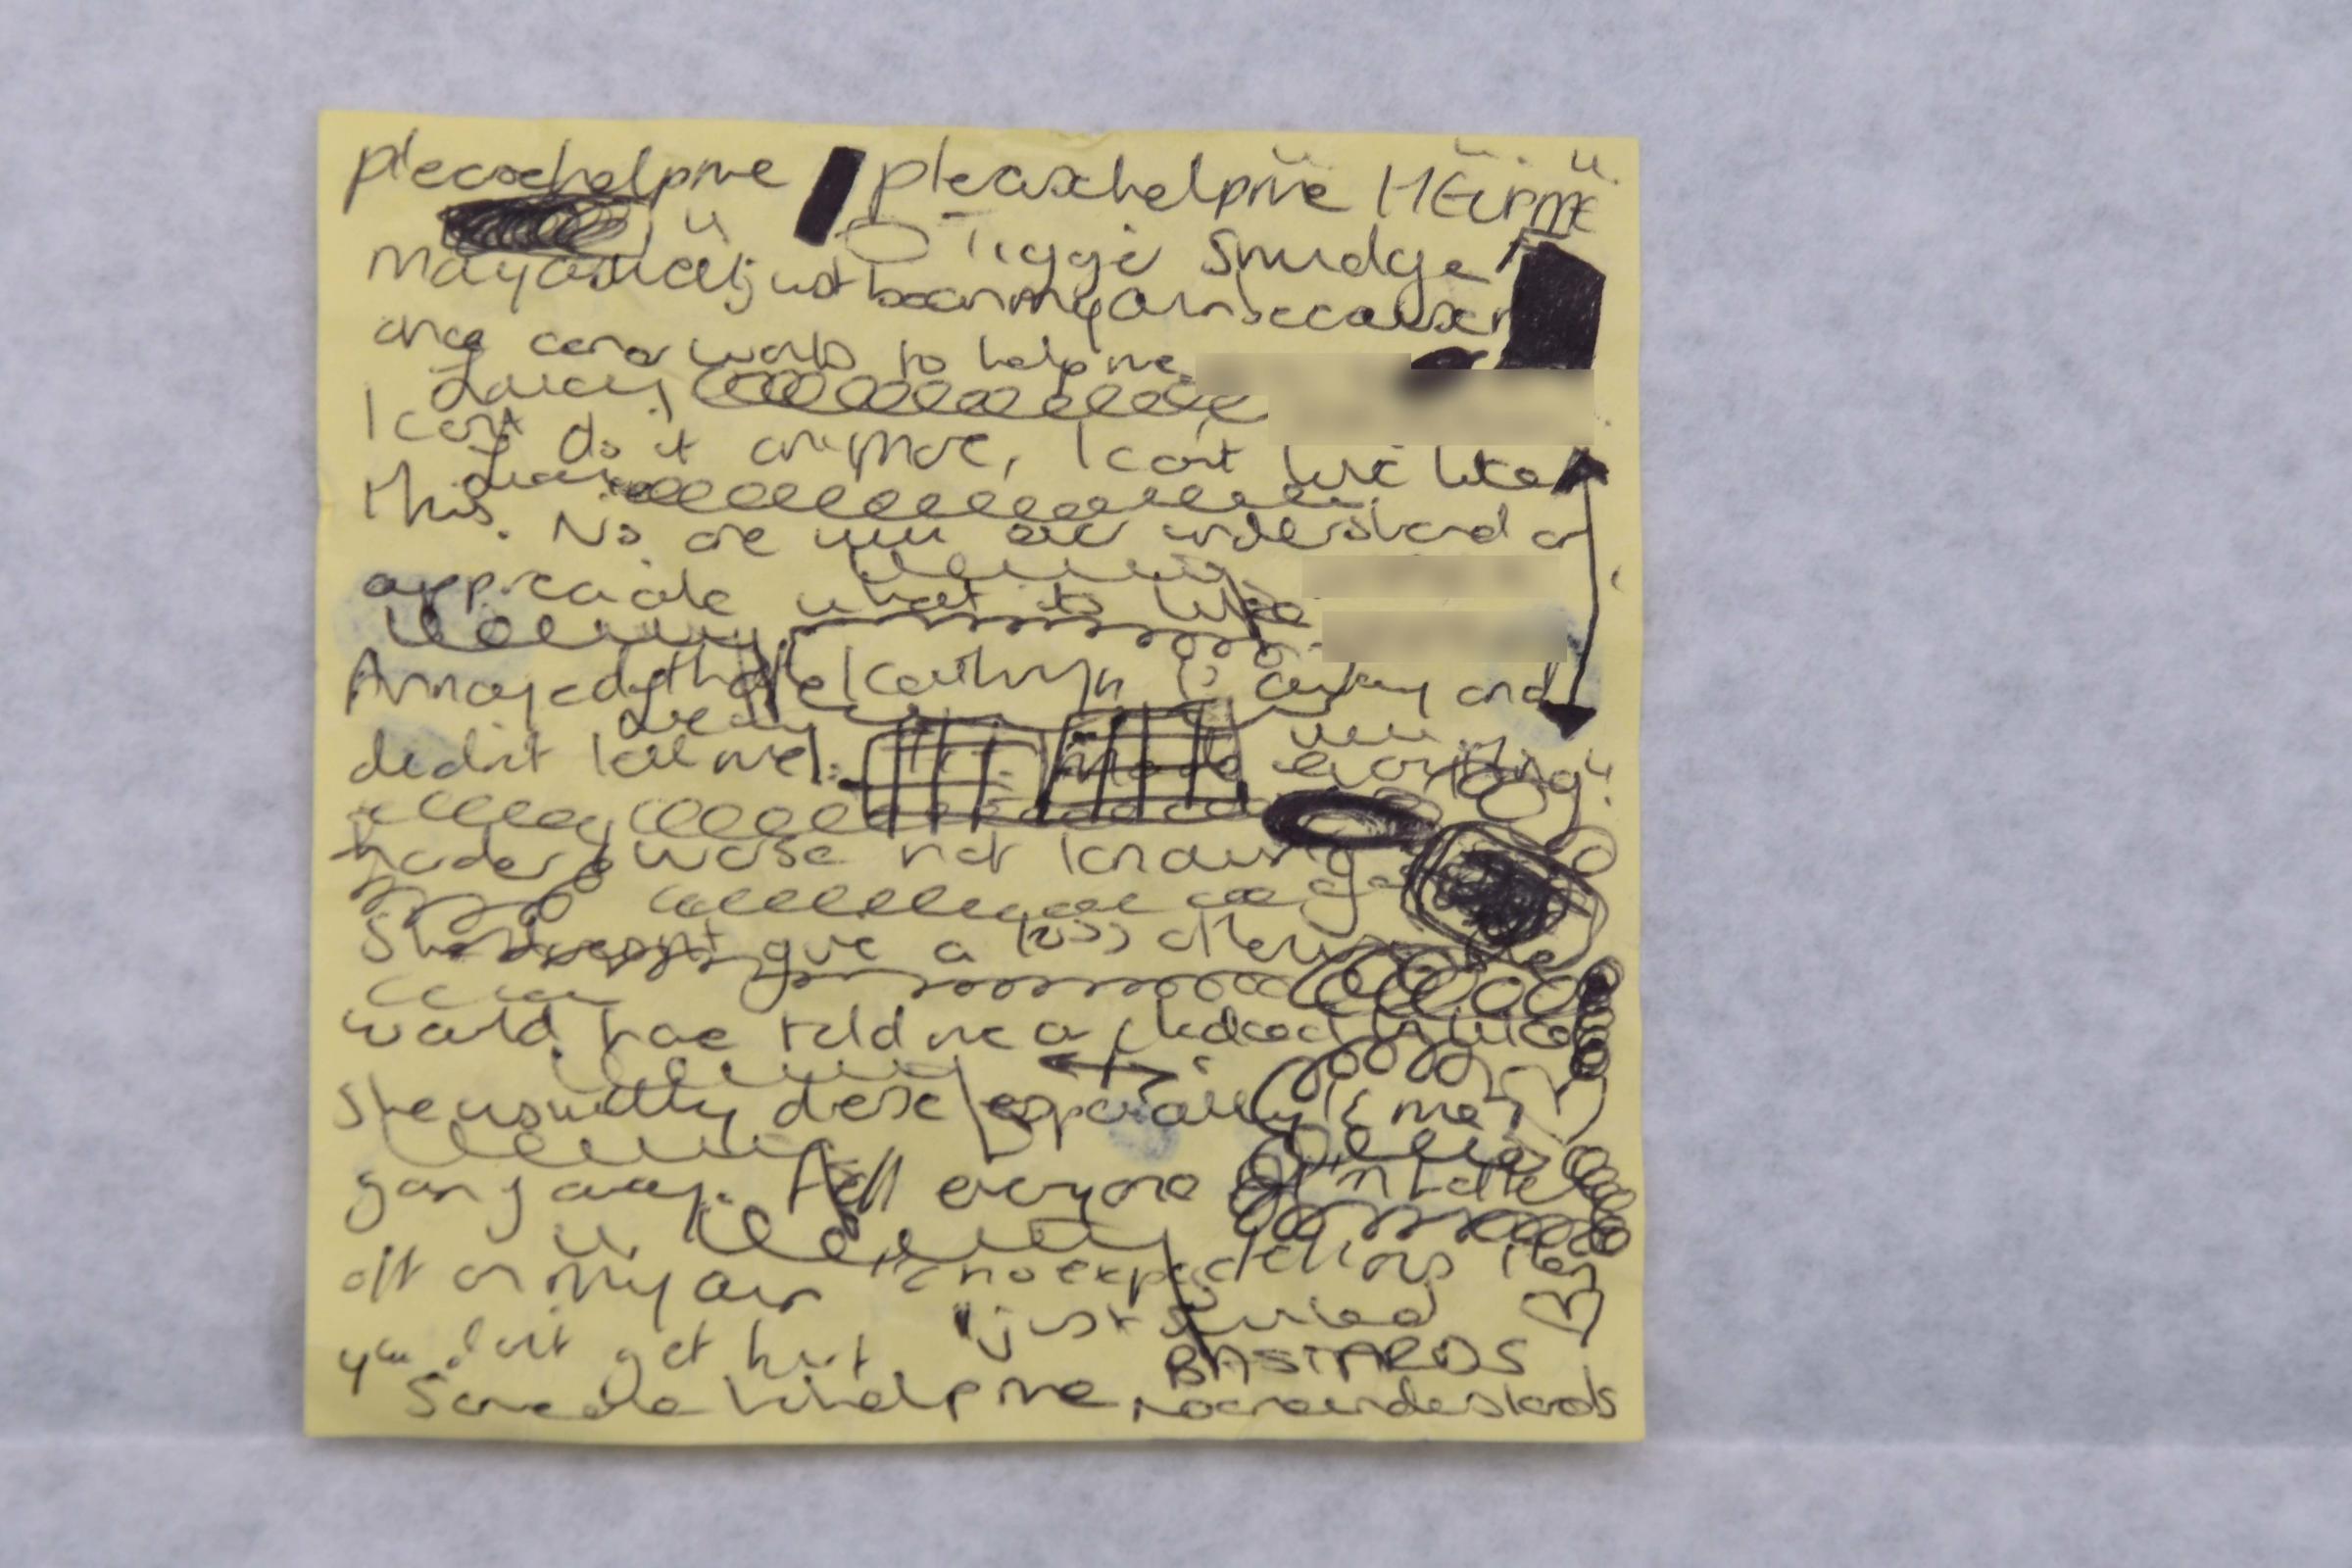 Handwritten messages uncovered at Lucy Letbys home in July 2018. Image: Cheshire Constabulary.